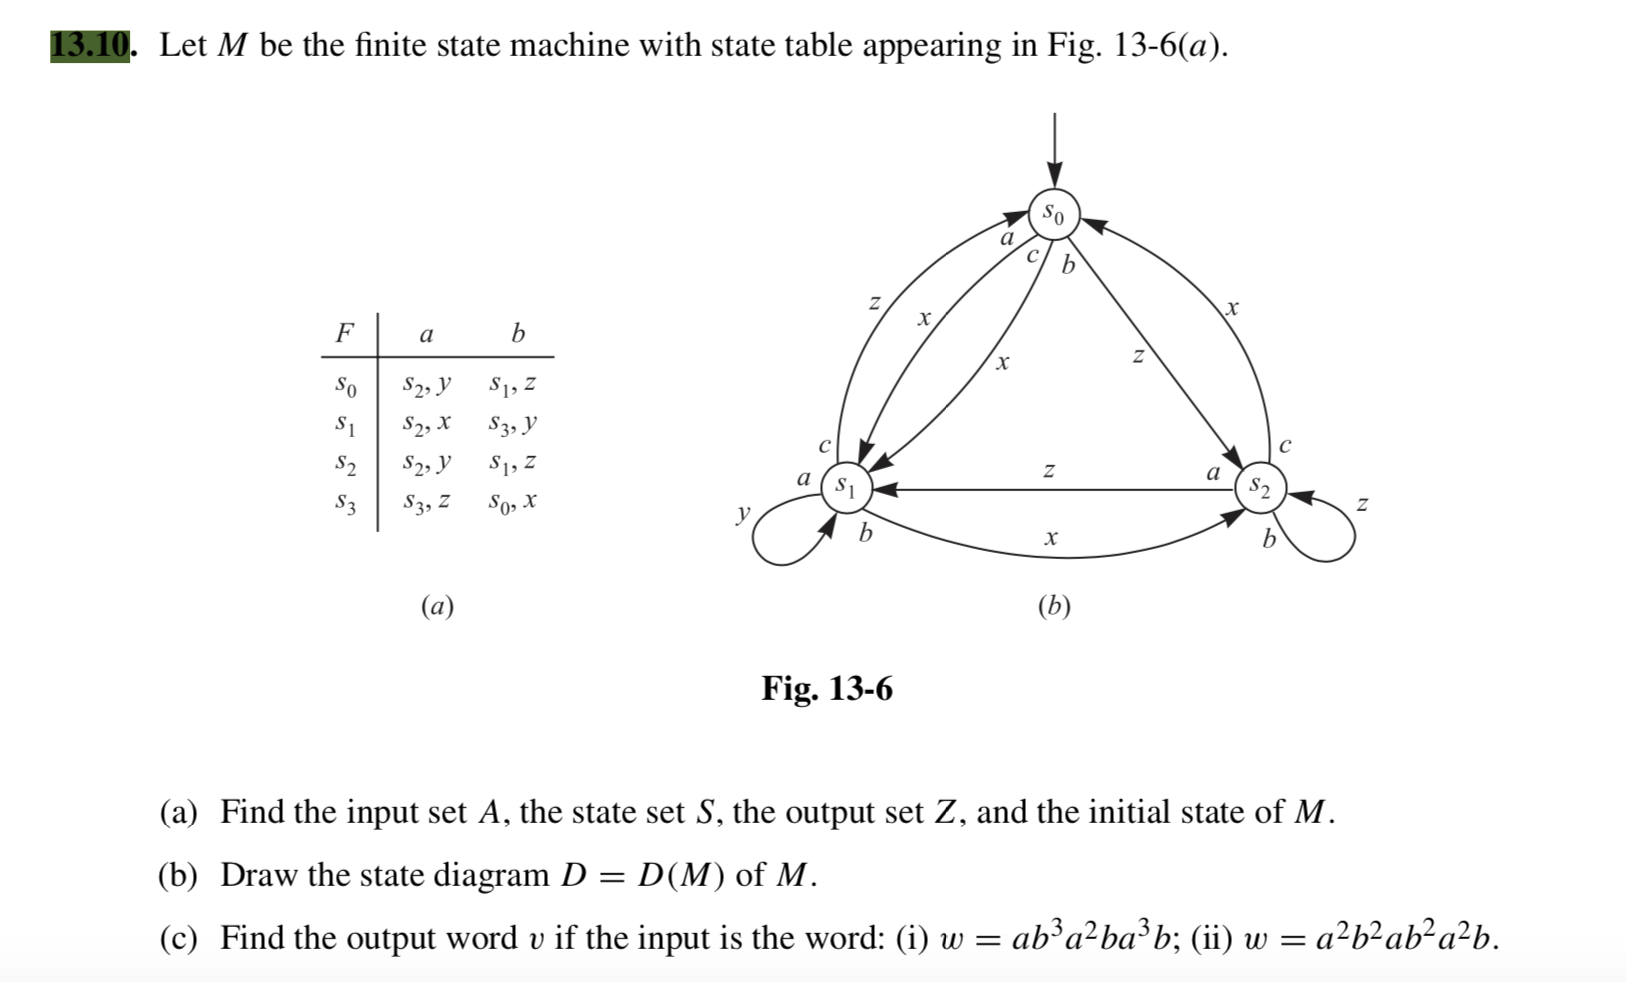 Let M be the finite state machine with state table appearing in Fig. 13-6(a).
So
b
F
a
So
S2, y
S1, Z
S1
S2, X
S3, y
S2, y
S3, z
S2
S1, Z
S3
So, X
(a)
(b)
Fig. 13-6
(a) Find the input set A, the state set S, the output set Z, and the initial state of M.
(b) Draw the state diagram D = D(M) of M.
